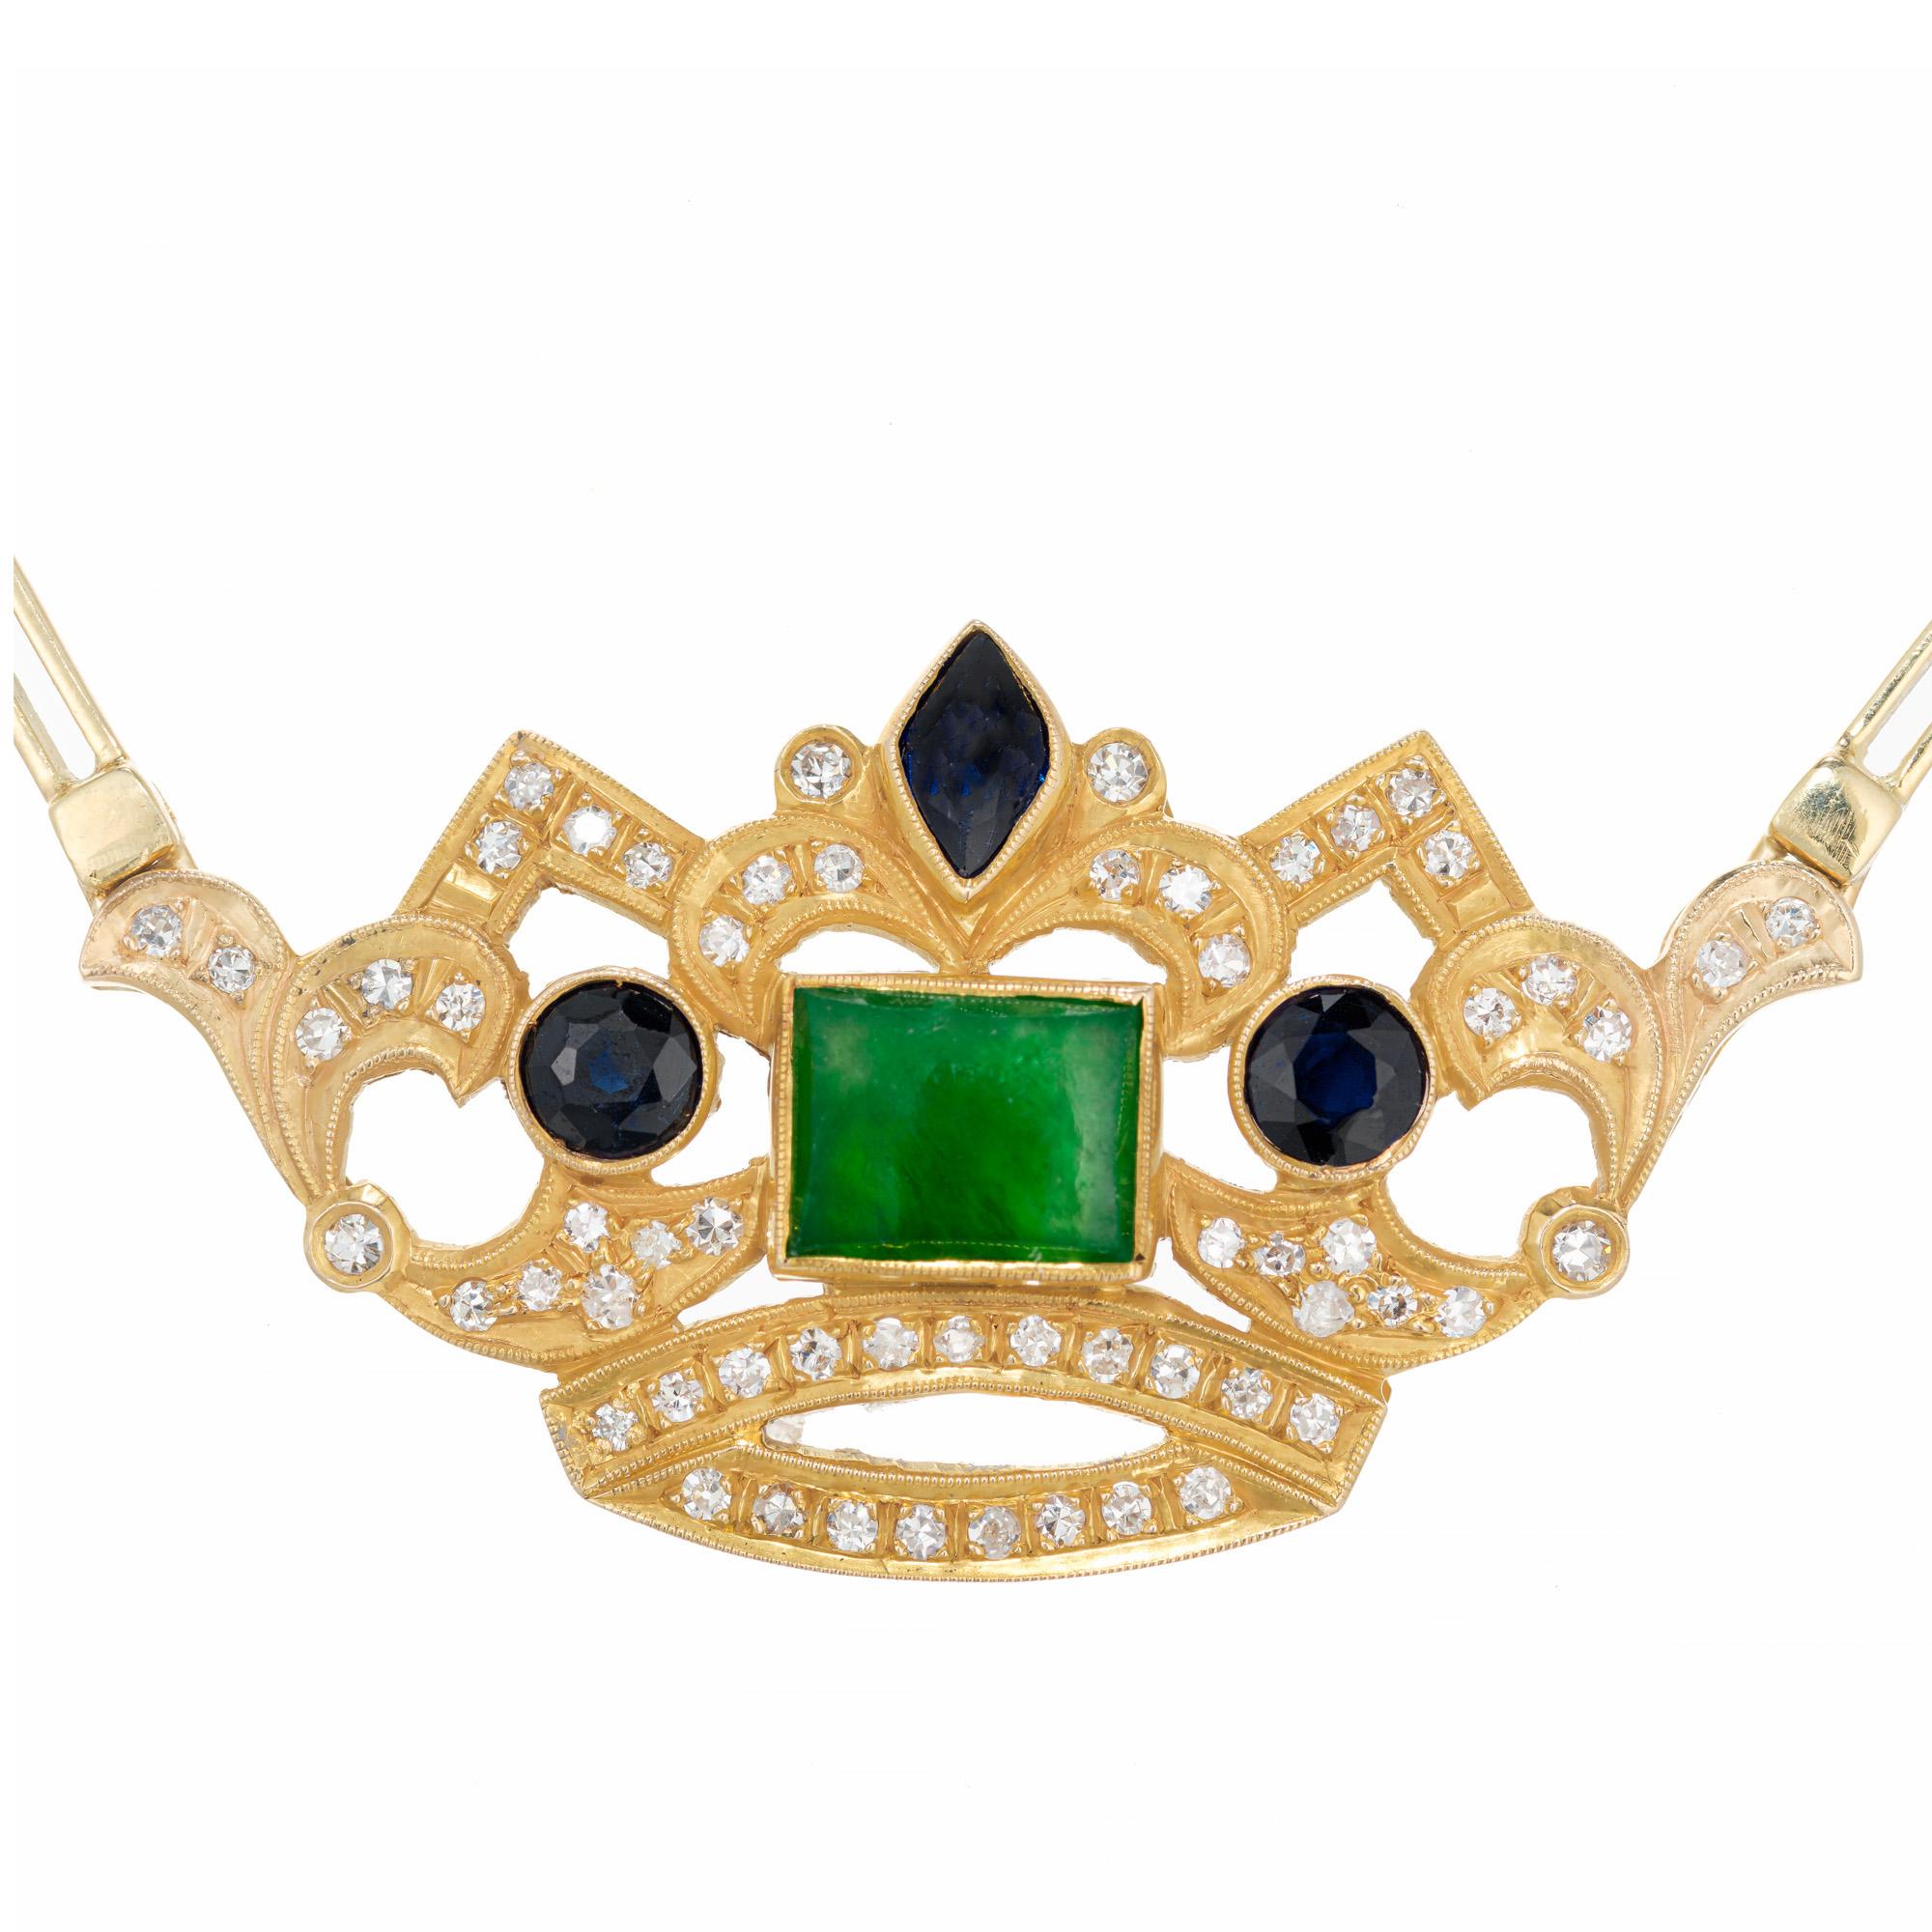 Vintage 1960's Jade, sapphire and diamond crown pendant necklace. The 18k yellow gold Crown has a GIA certified natural Jadeite Jade rectangular center stone which is certified as untreated. One GIA certified Marquise cut sapphire also certified as